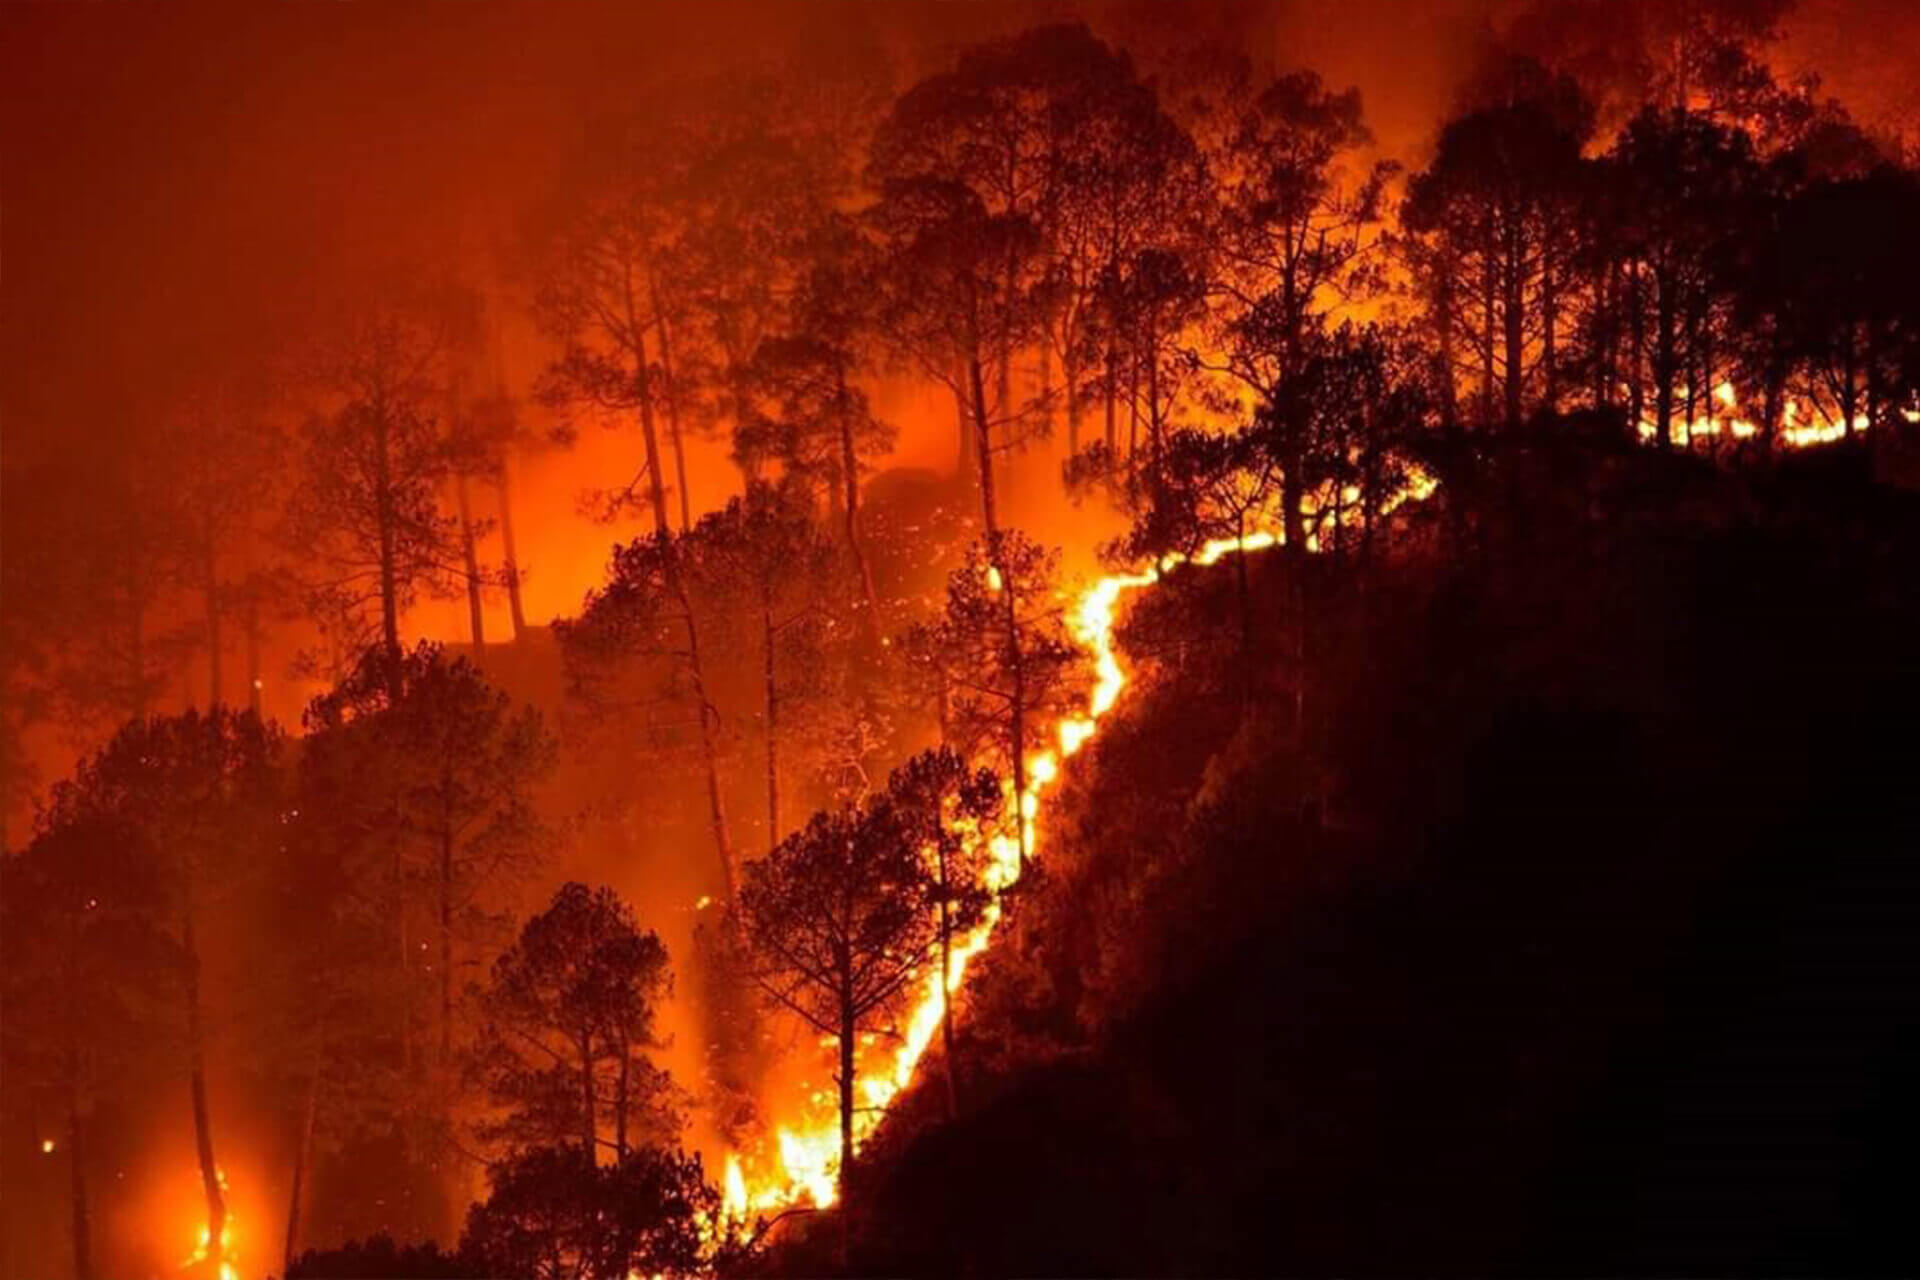 It Is High Time India Establishes a Cohesive National Policy on Forest Fires